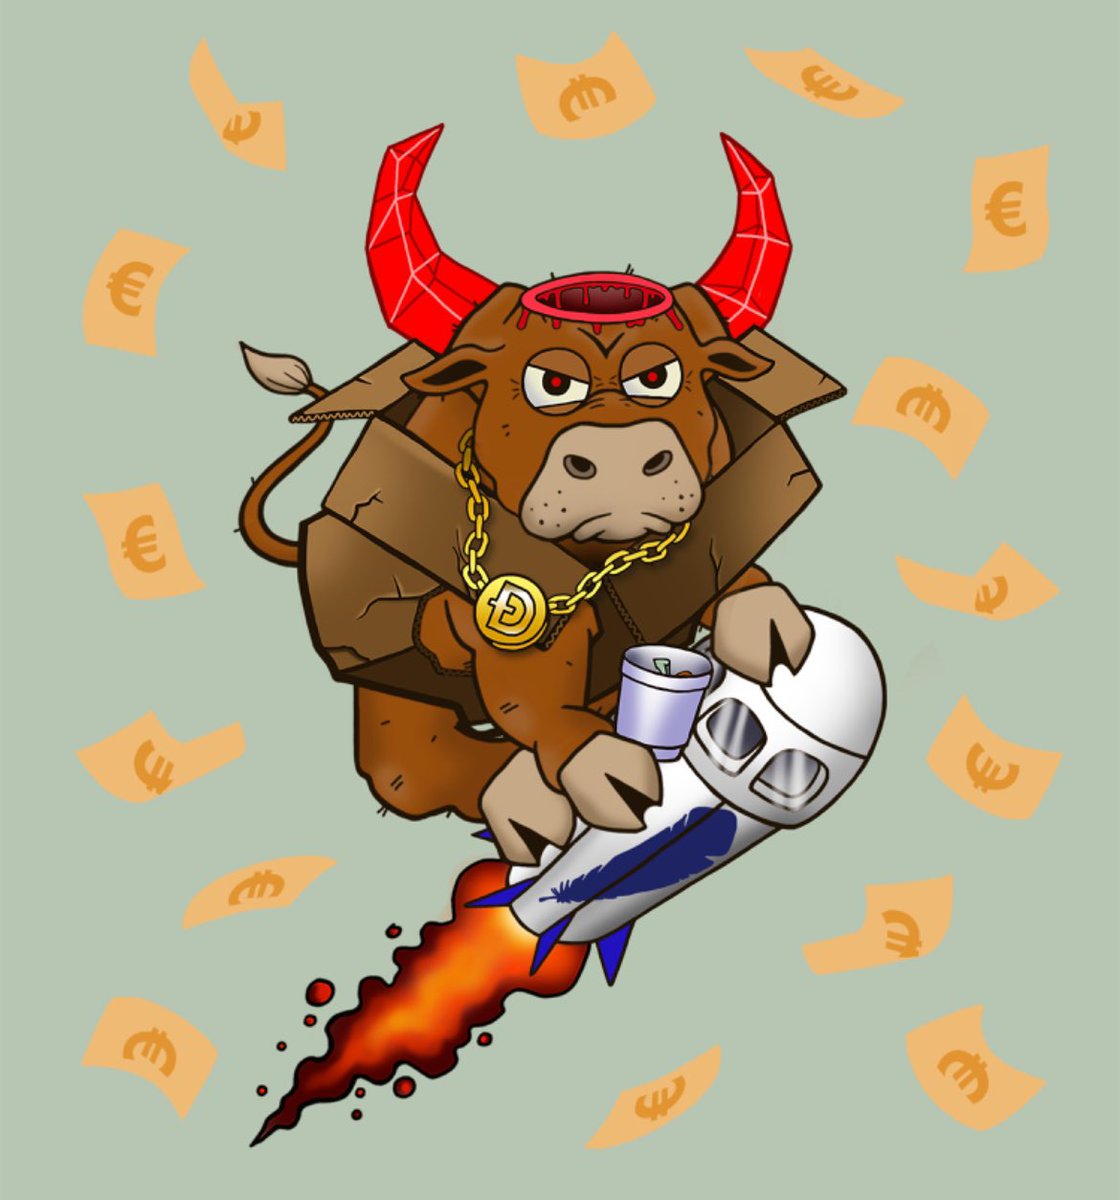 Thank you to the #BULLuminati over at @wallstbullsNFT I burned two #ETH bulls for my first ordinal #BTC bull… After I burned them, @camrackam & the team announced random burners will be airdropped another #ETH bull… Welp, here’s my new bull! Go sweep & burn some bulls NOW‼️